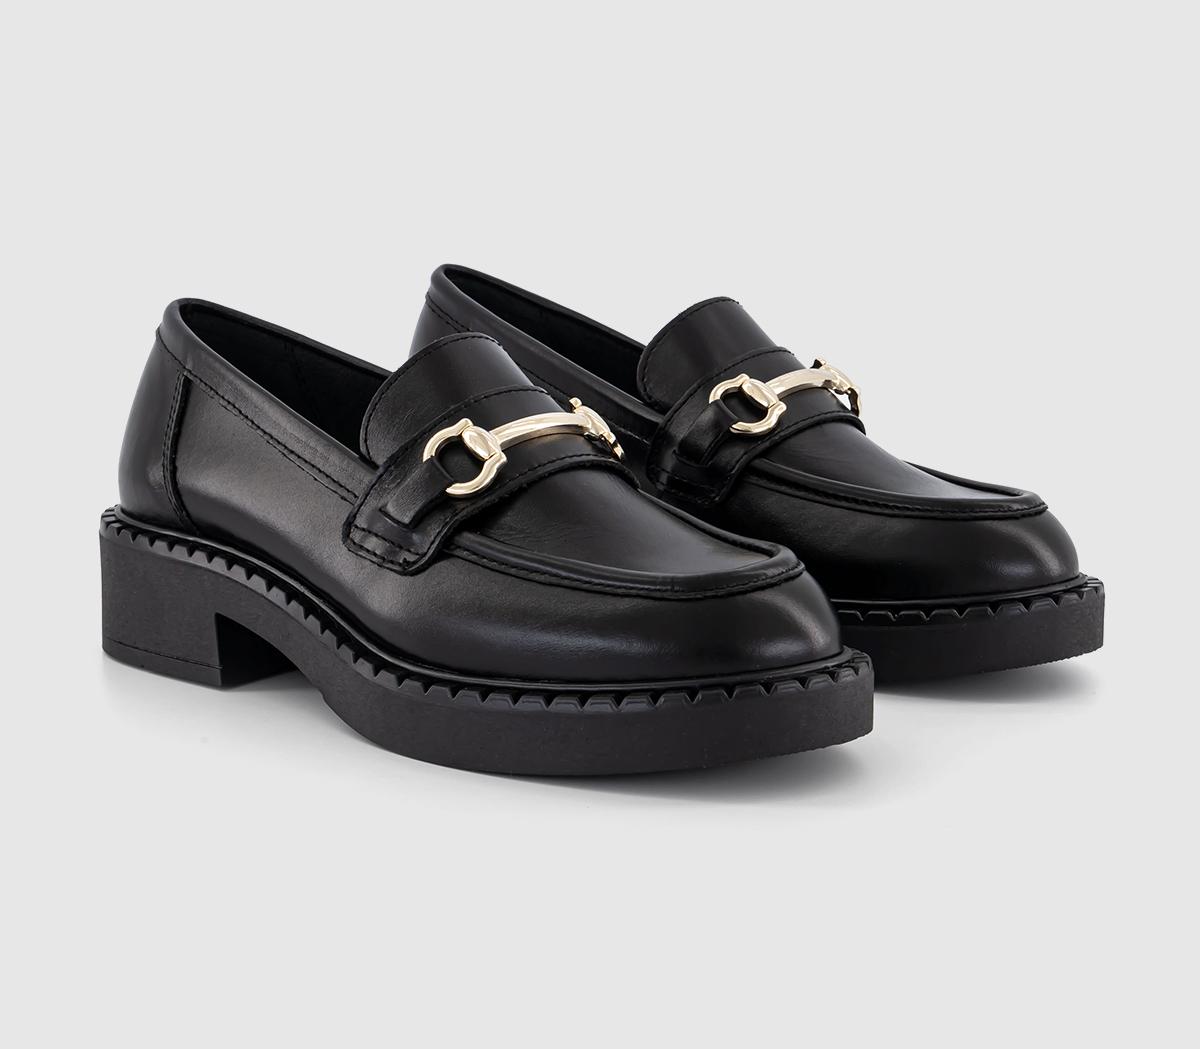 OFFICE Womens Future Chunky Hardware Loafers Black Leather, 5